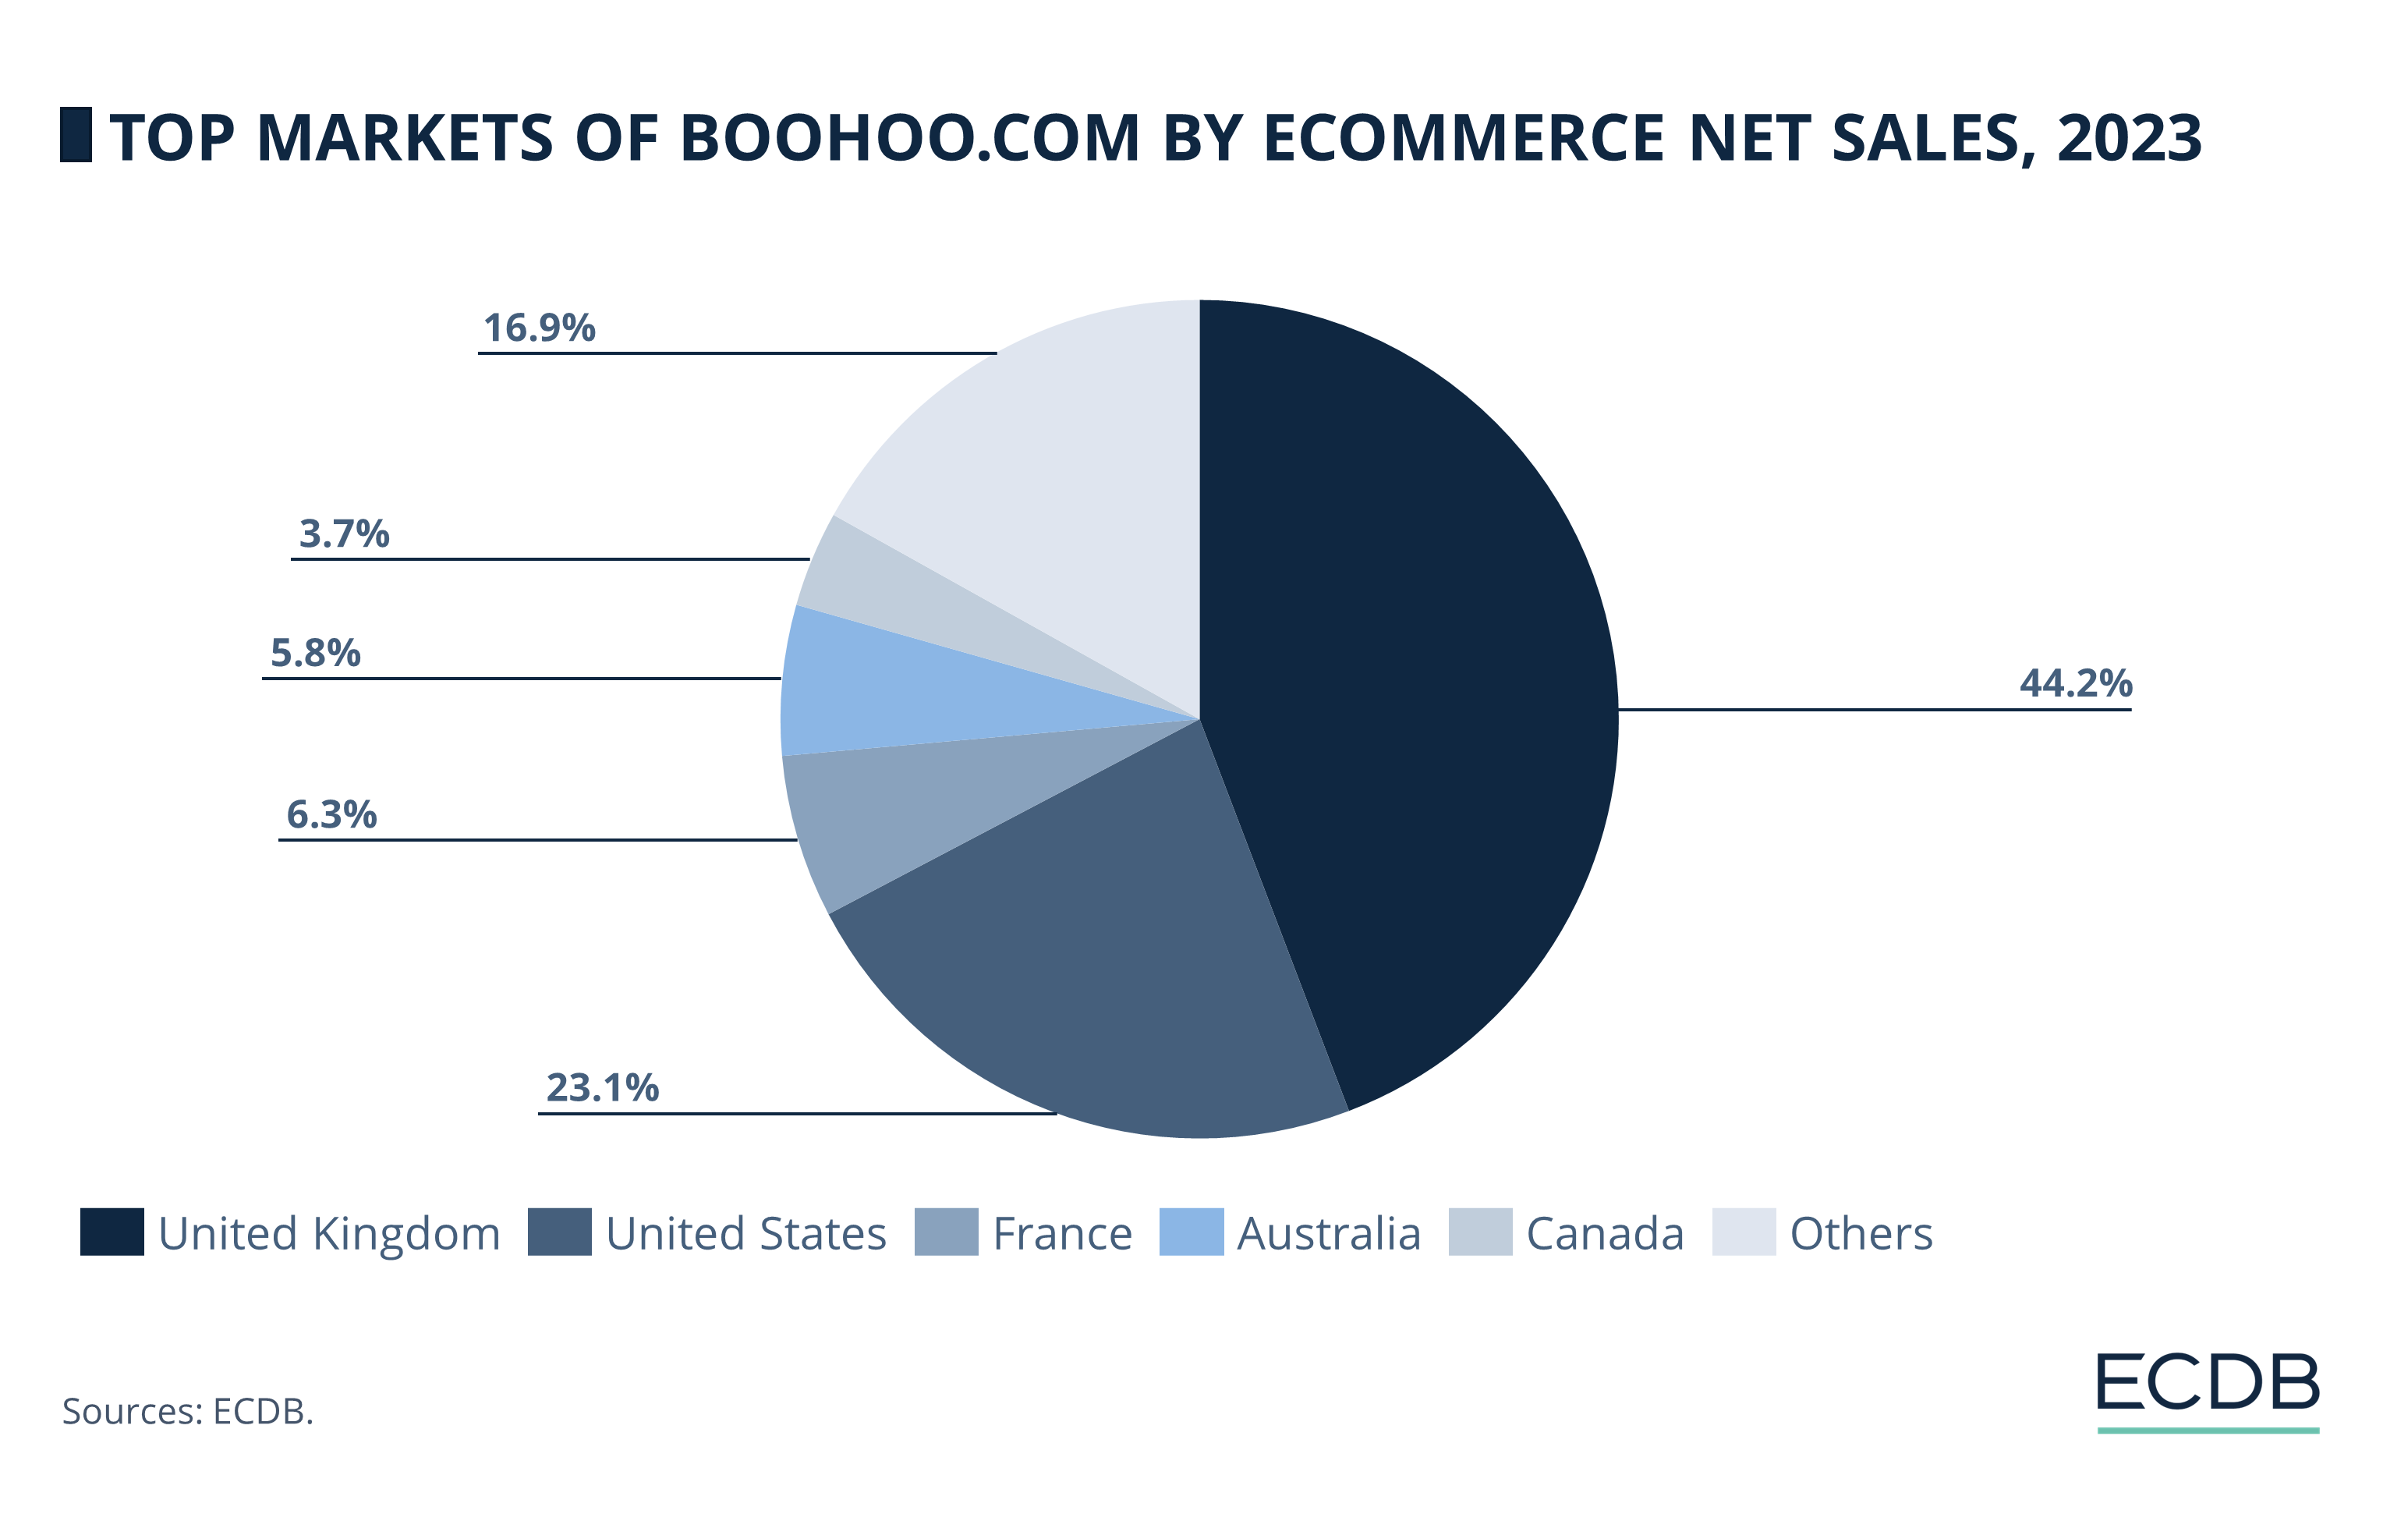 Top Markets of Boohoo.com by eCommerce Net Sales, 2023